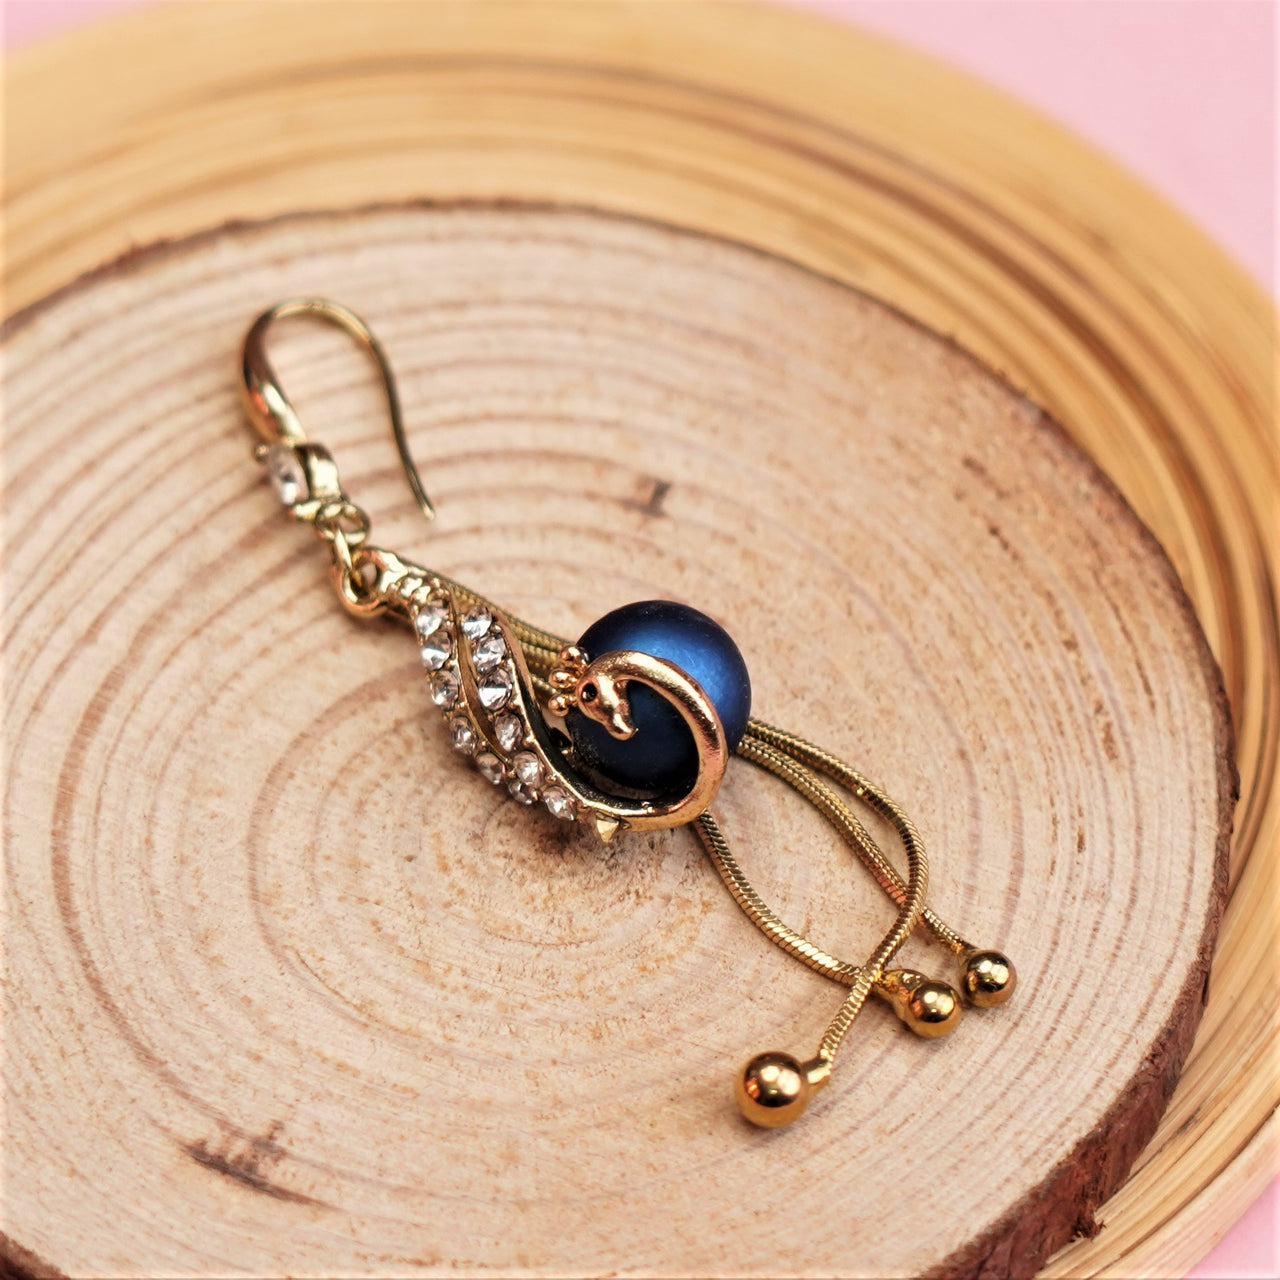 A peacock design ear ring on a wooden props. 